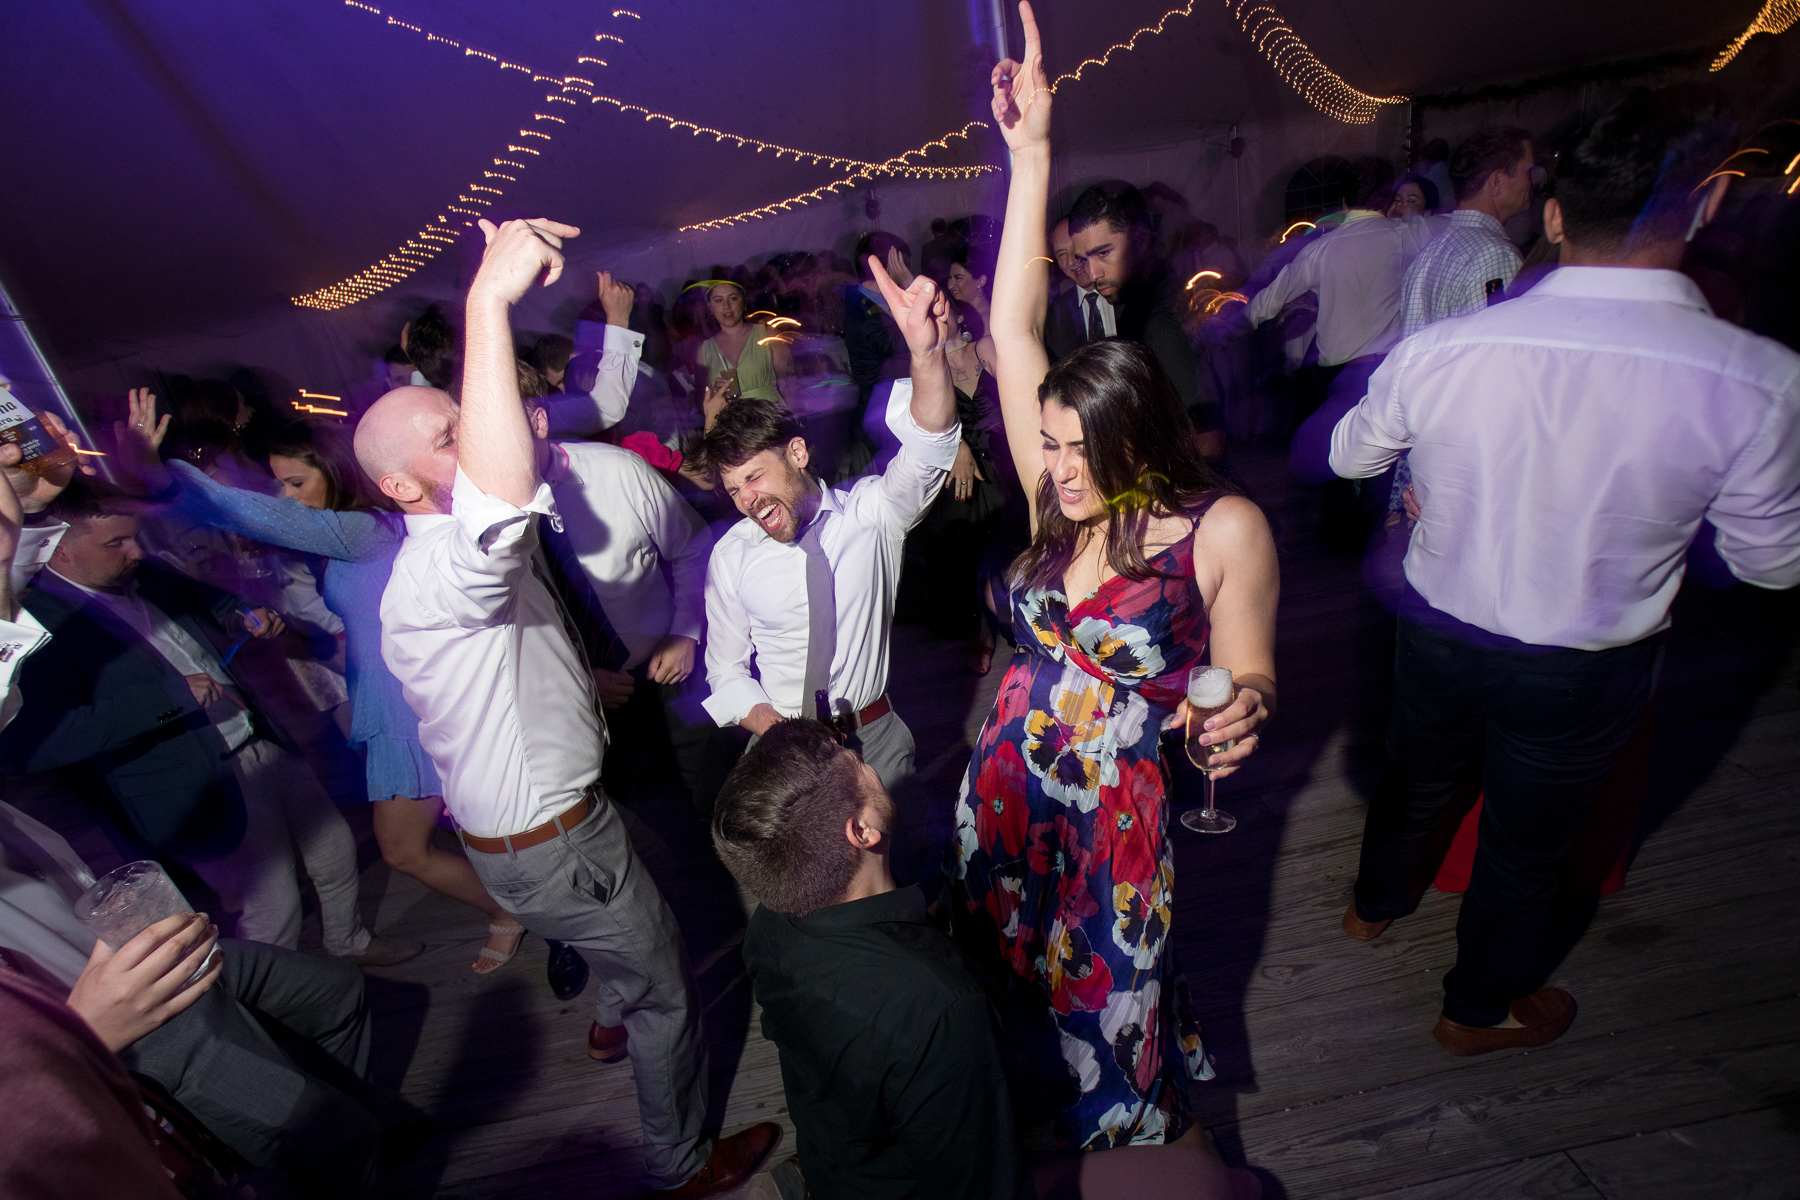 Guests having a great time on the dance floor at the reception.